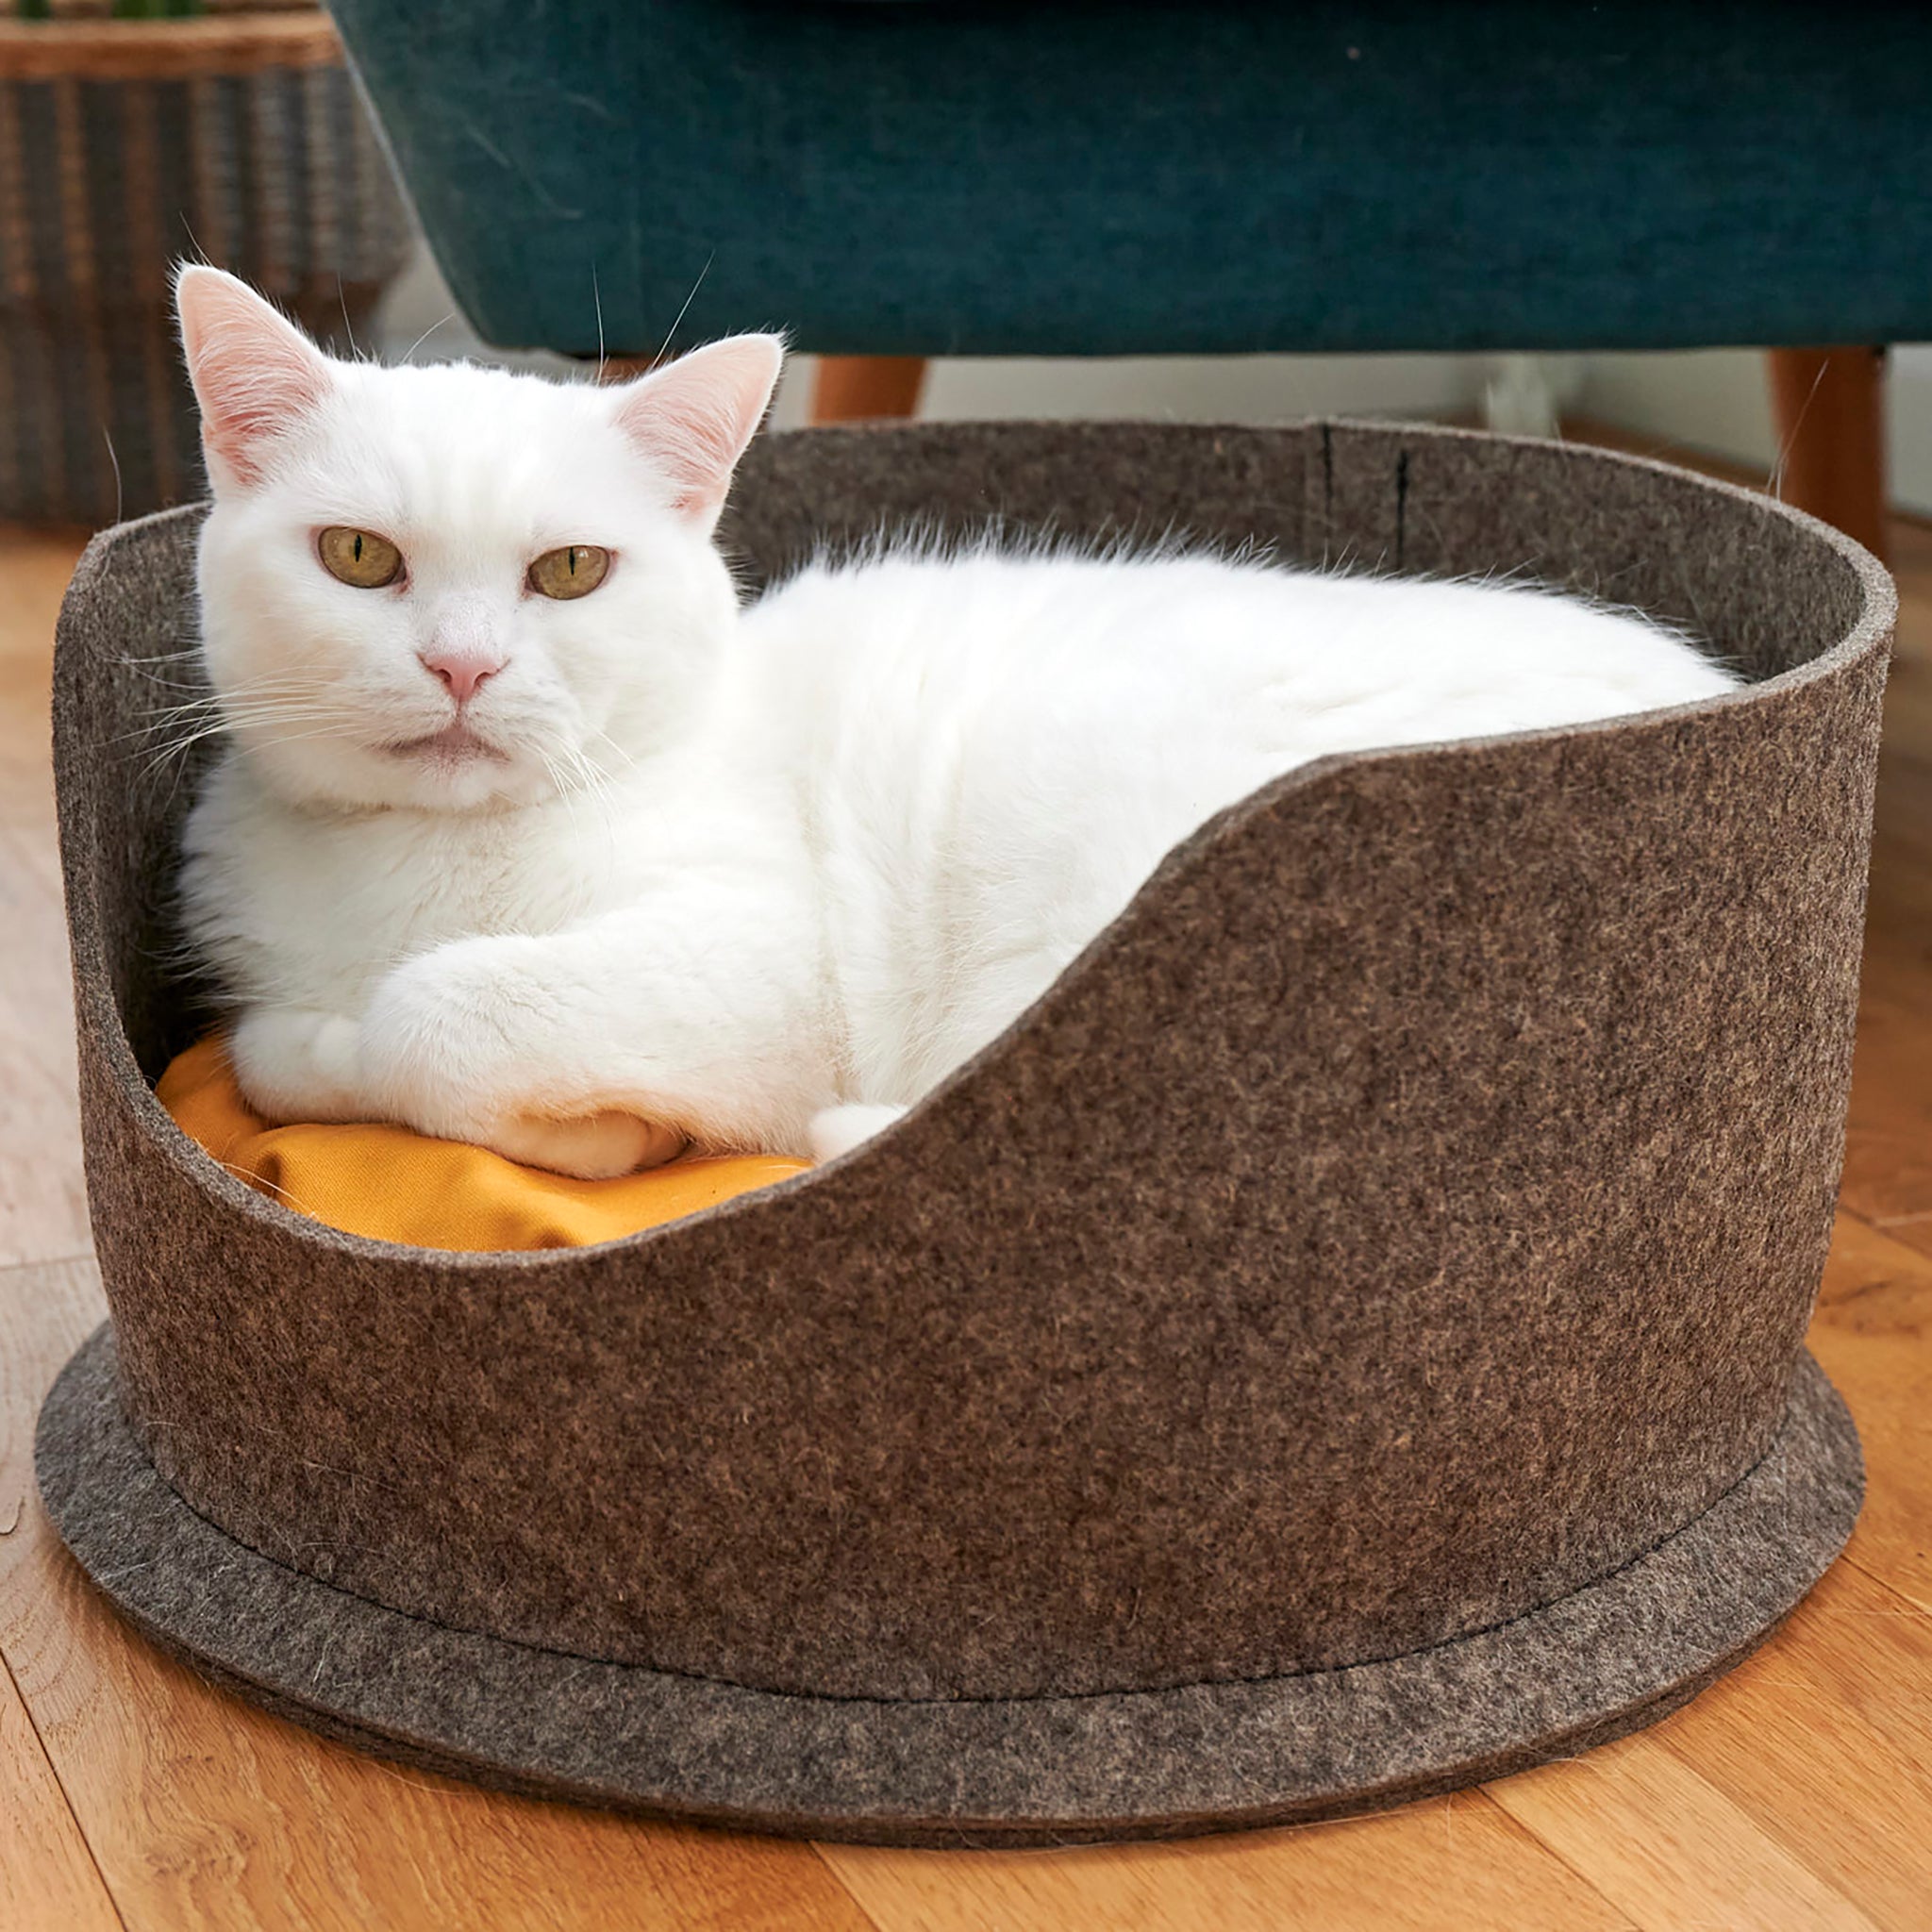 A white cat with yellow eyes, sitting inside a Chimney Sheep PteSnug wool felt cat bed. The bed is sitting on a wooden floor. There is a yellow wool filled cushion inside the bed.